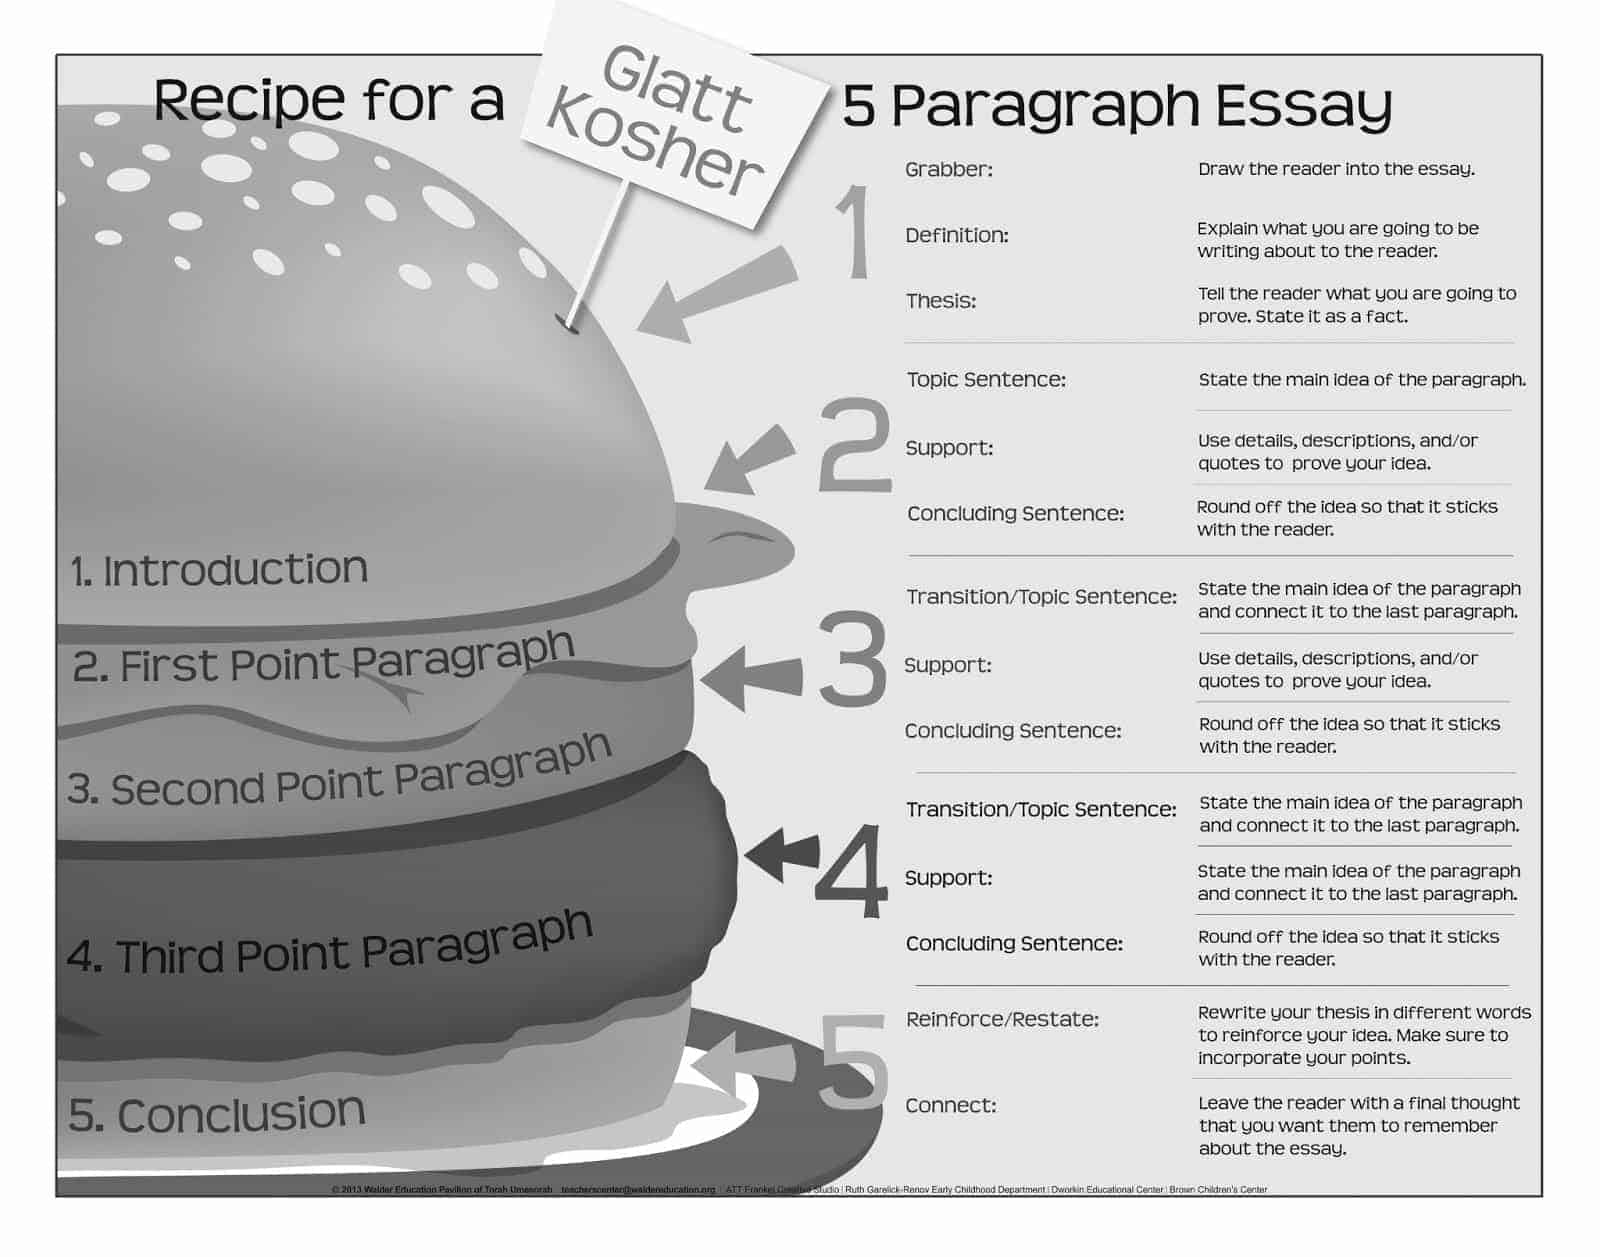 How To Write A 5 Paragraph Essay | Essay Freelance Writers